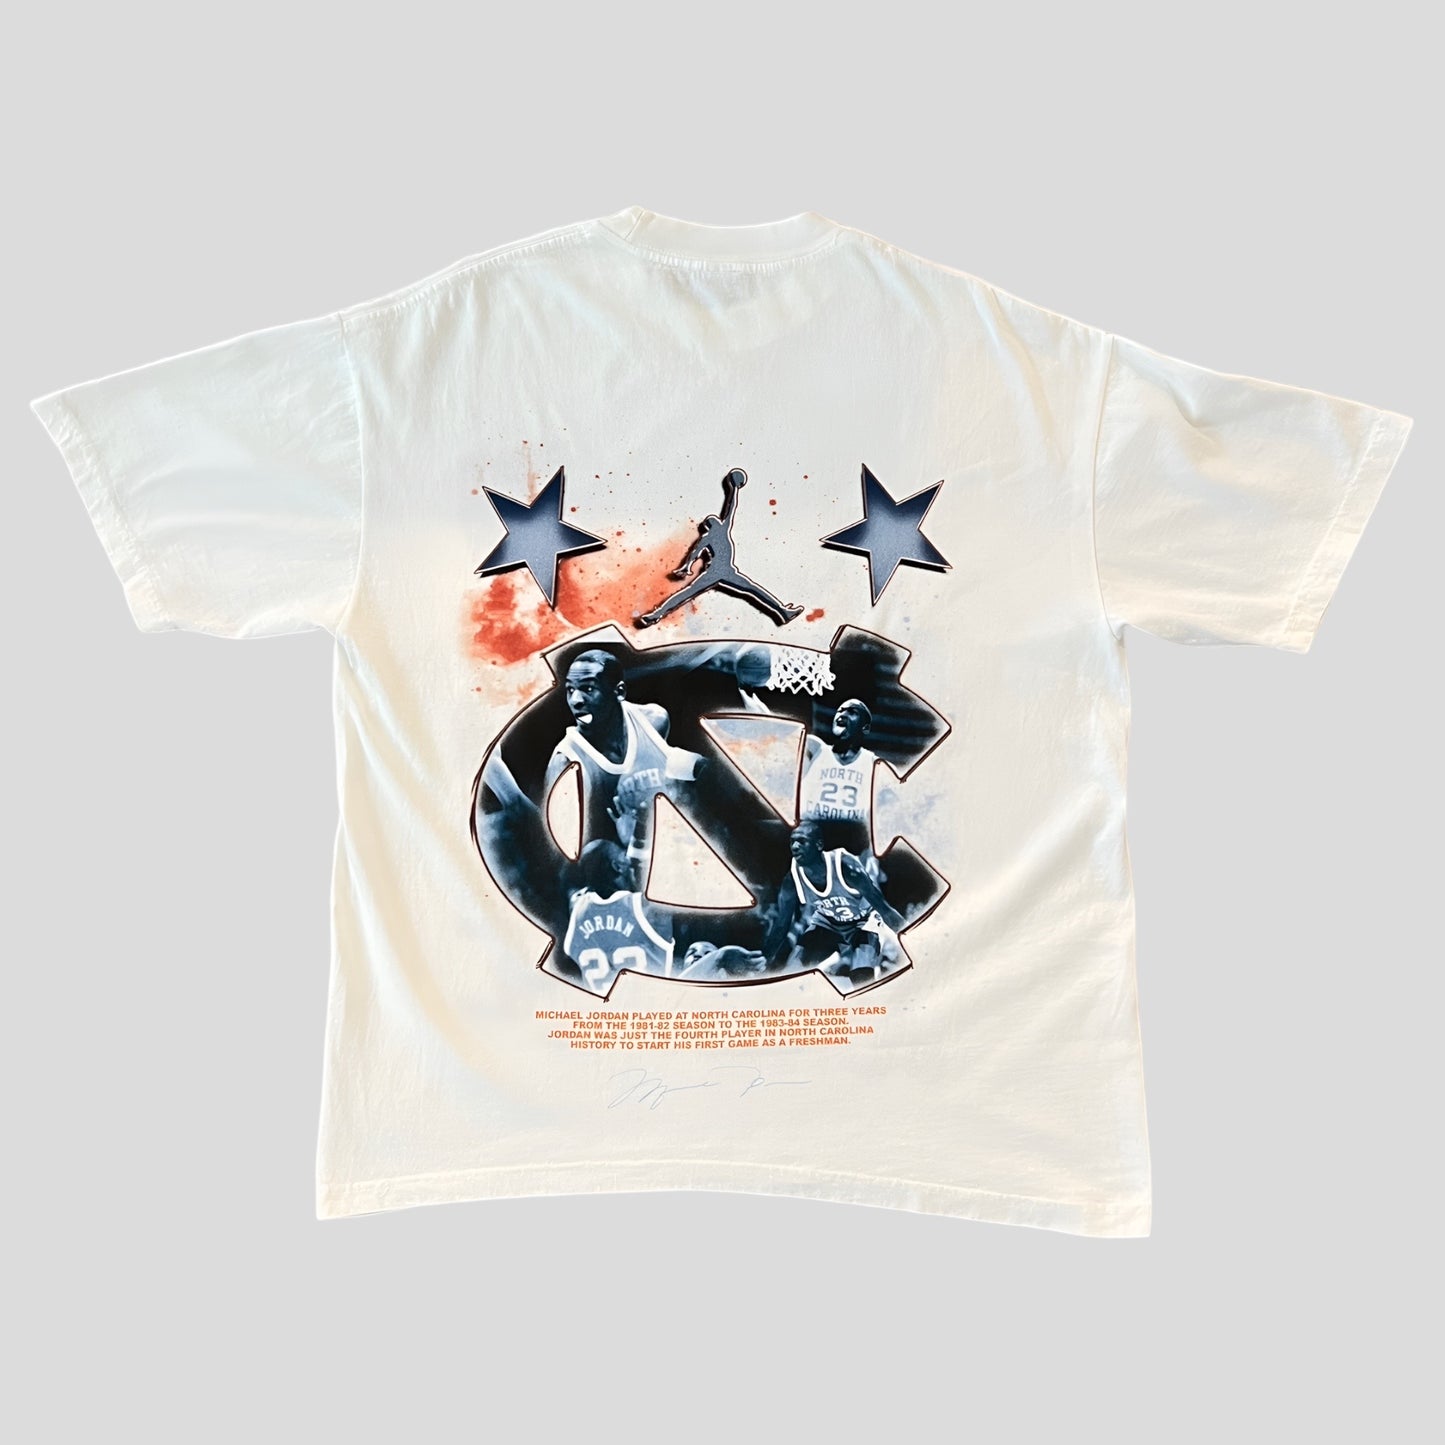 MJ Defining Moments Tee